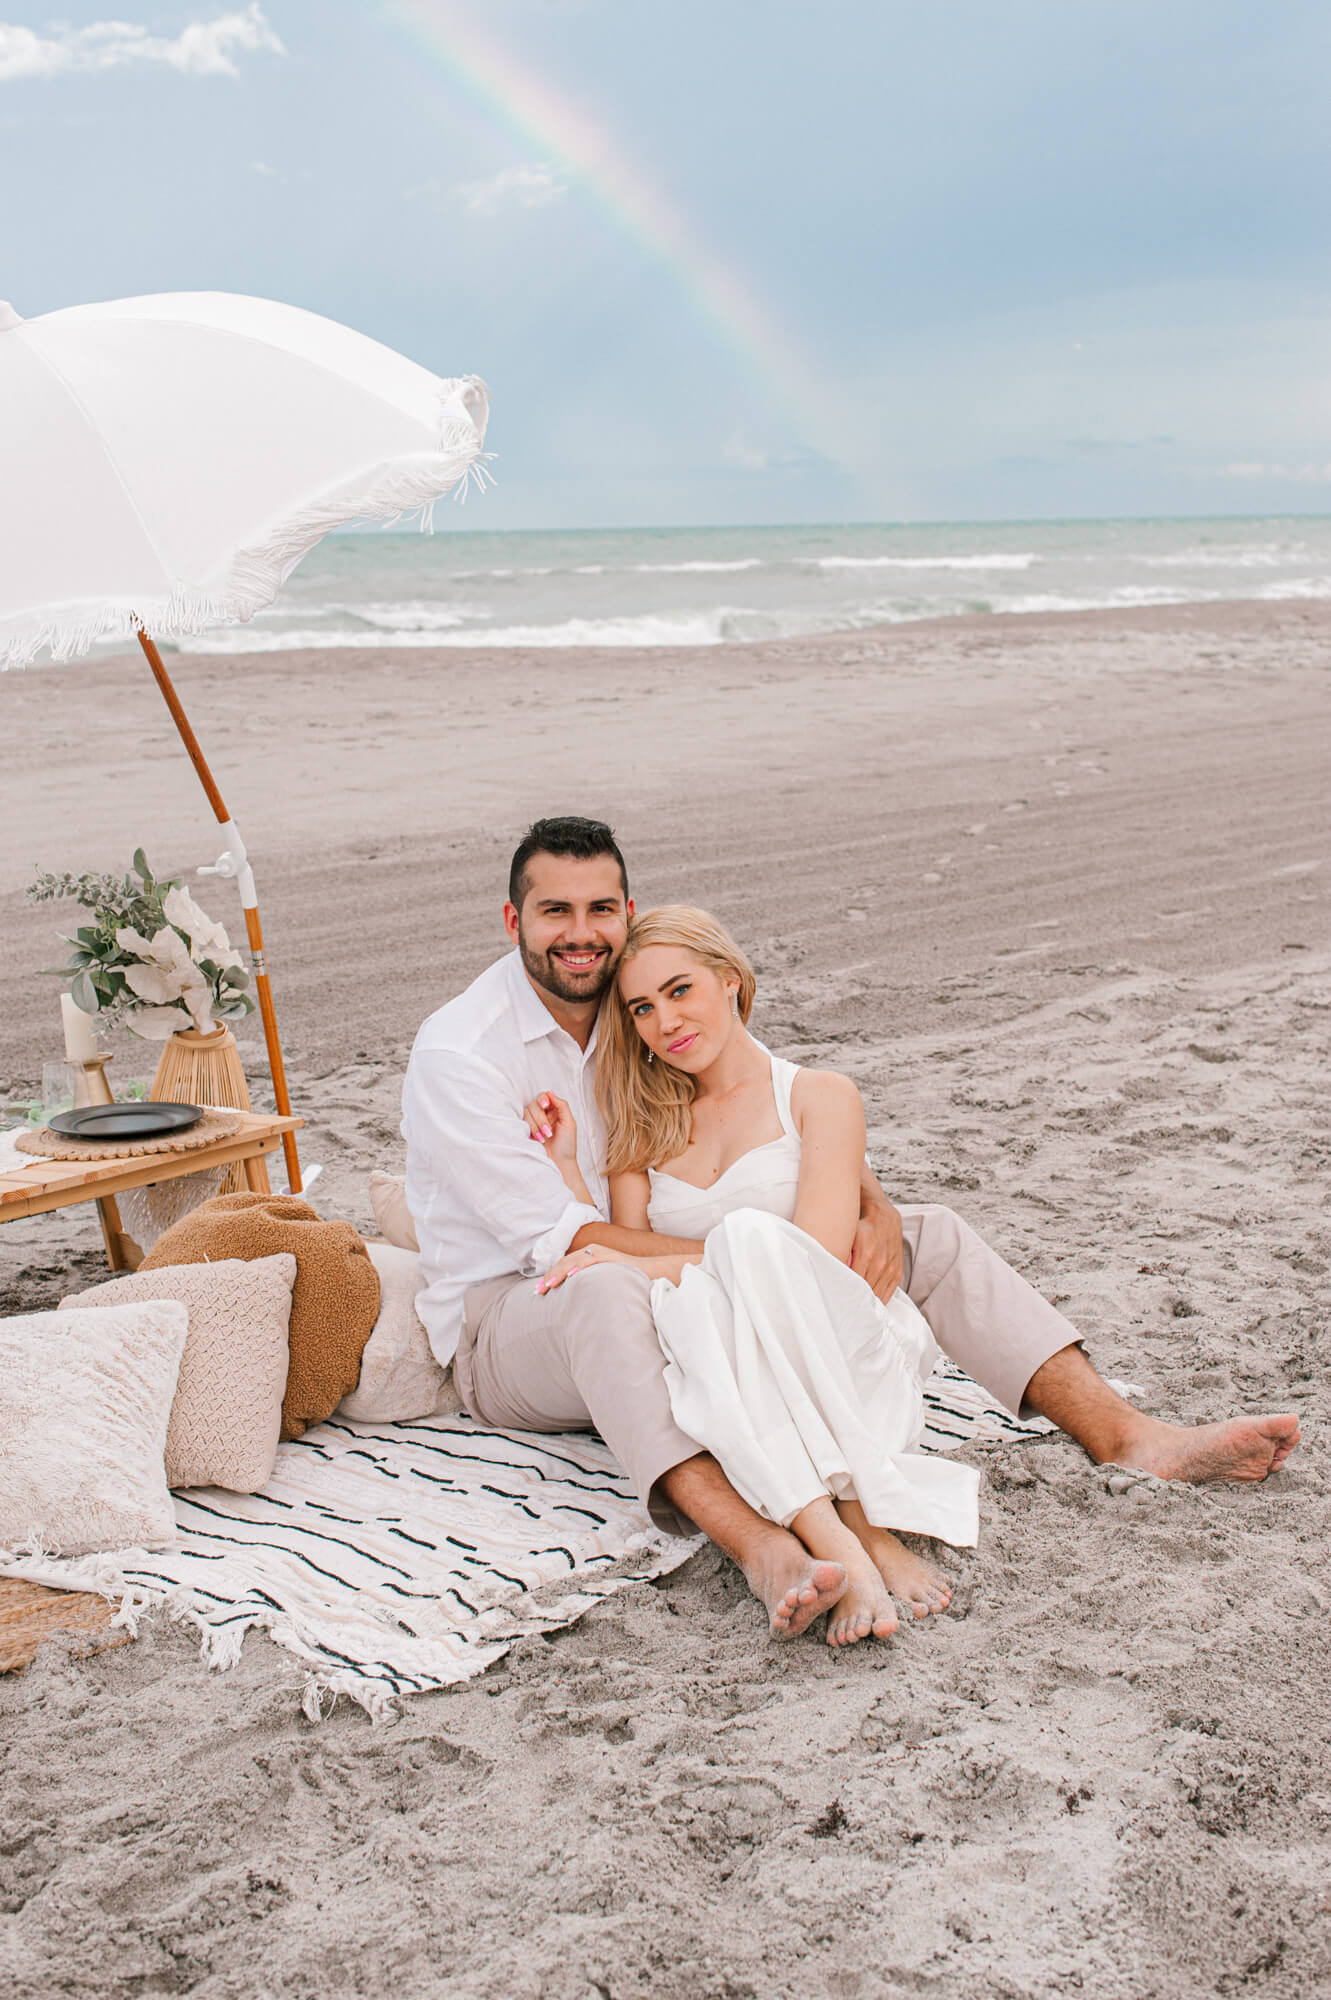 Adorable couple cuddling on the beach during their beach picnic with a rainbow in the background over the water